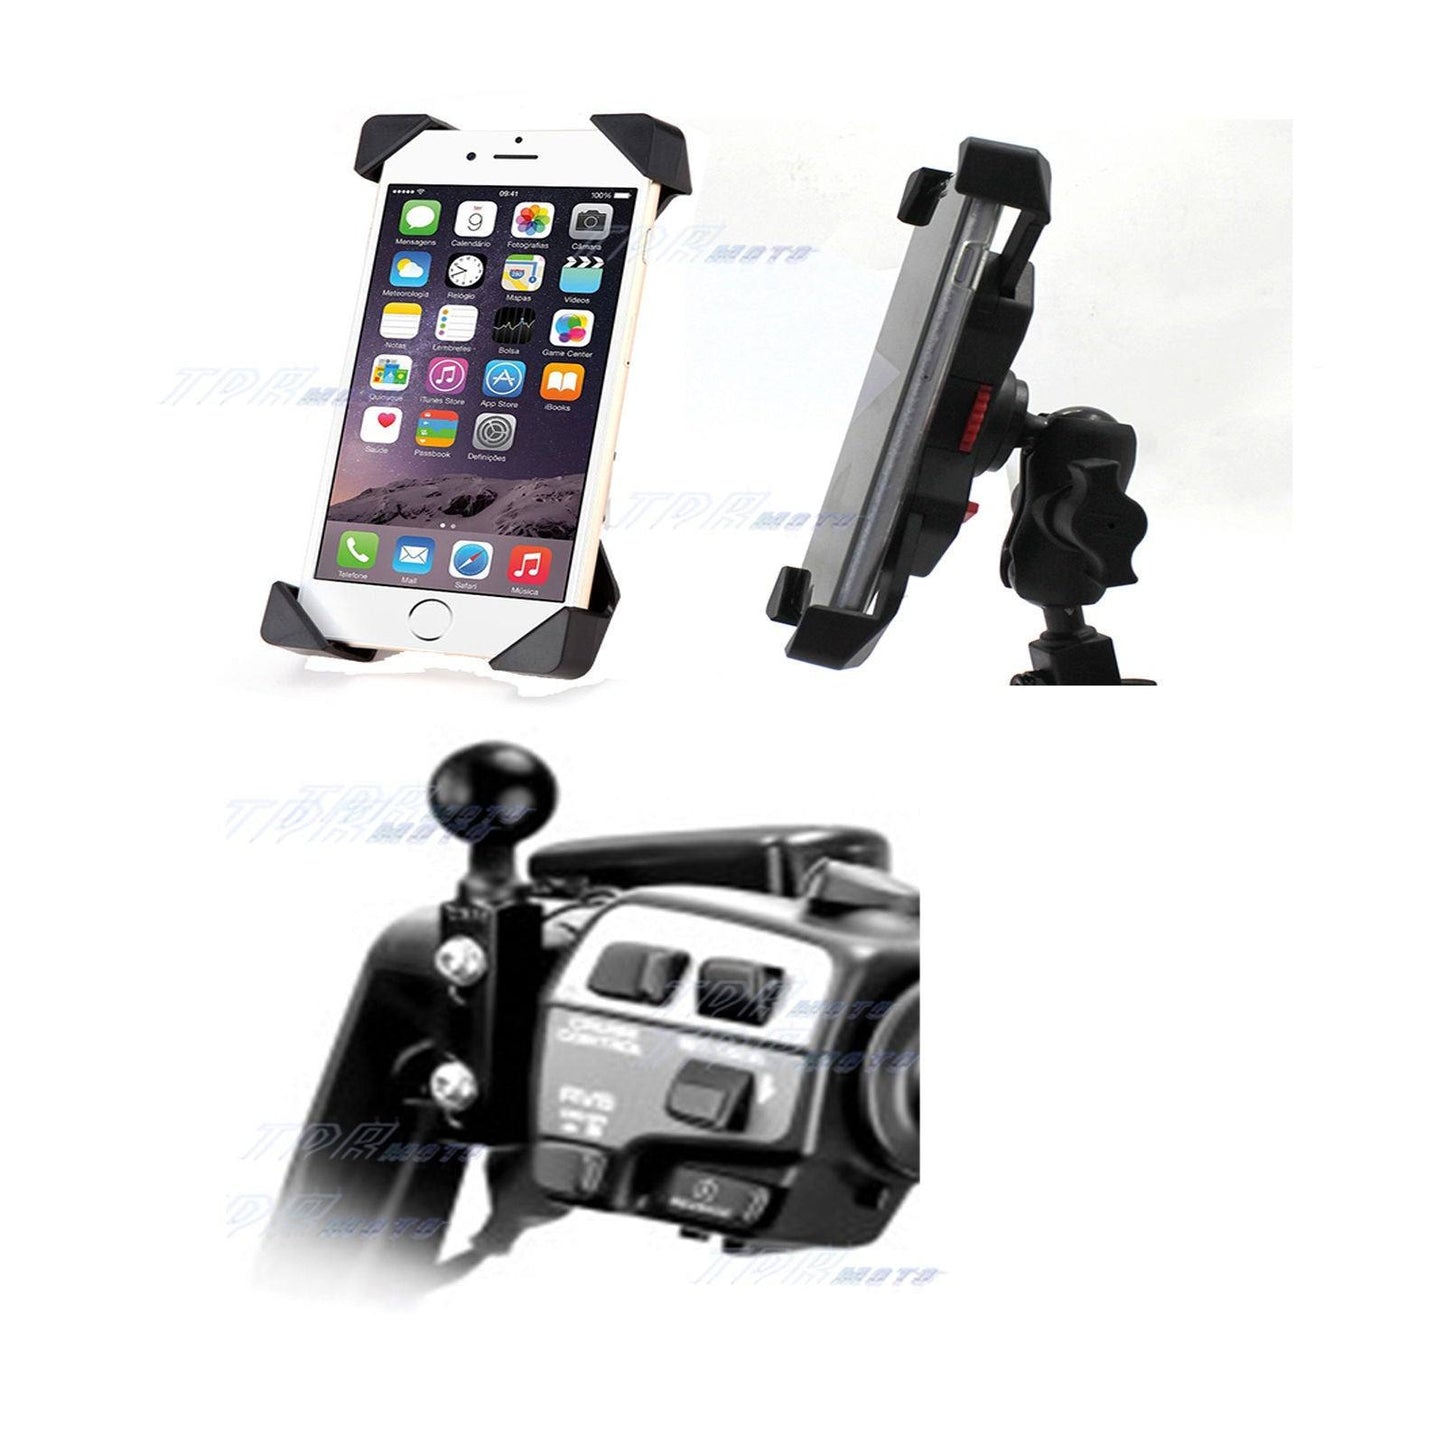 X-Bracket Motorcycle Bike Lever Mount Cellphone Holder USB Charger Cell Phone - TDRMOTO